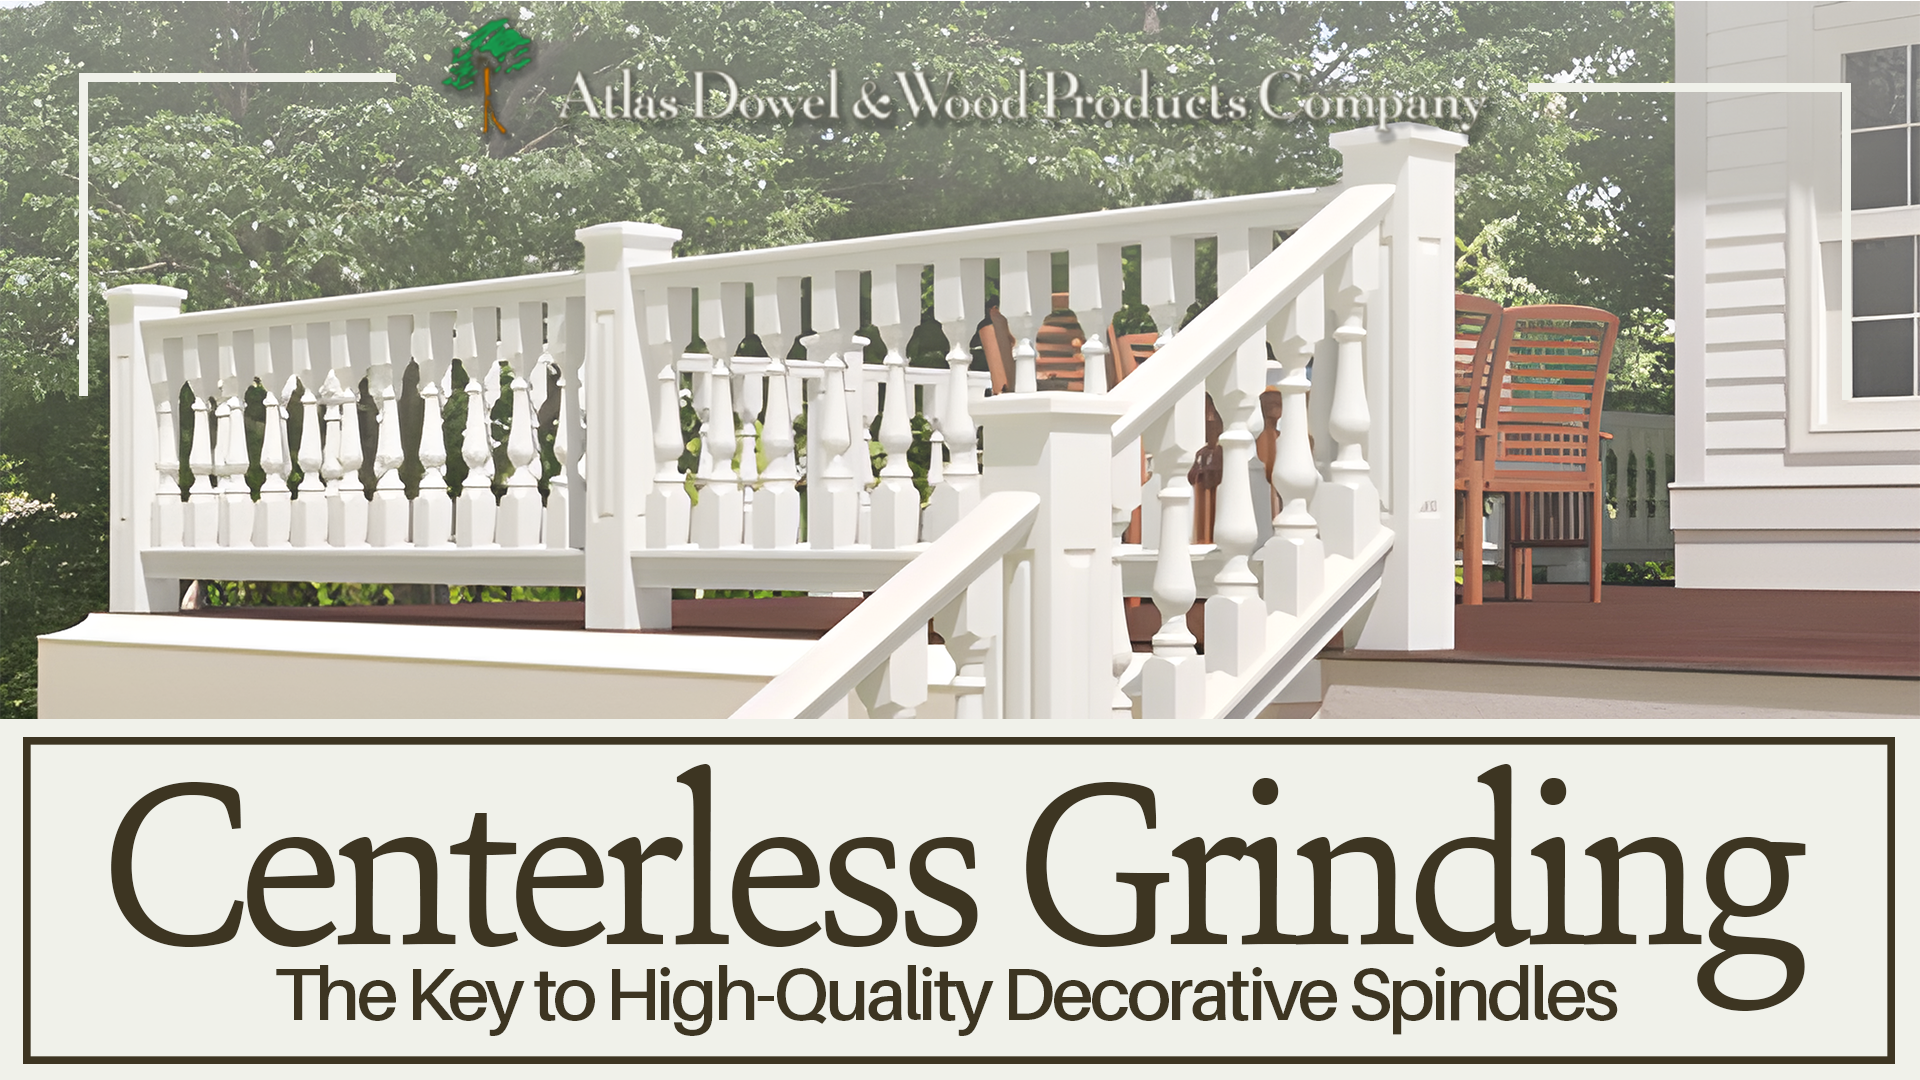 An outdoor patio with decorative spindles above the text " Centerless Grinding: The Key to High-Quality Decorative Spindles"